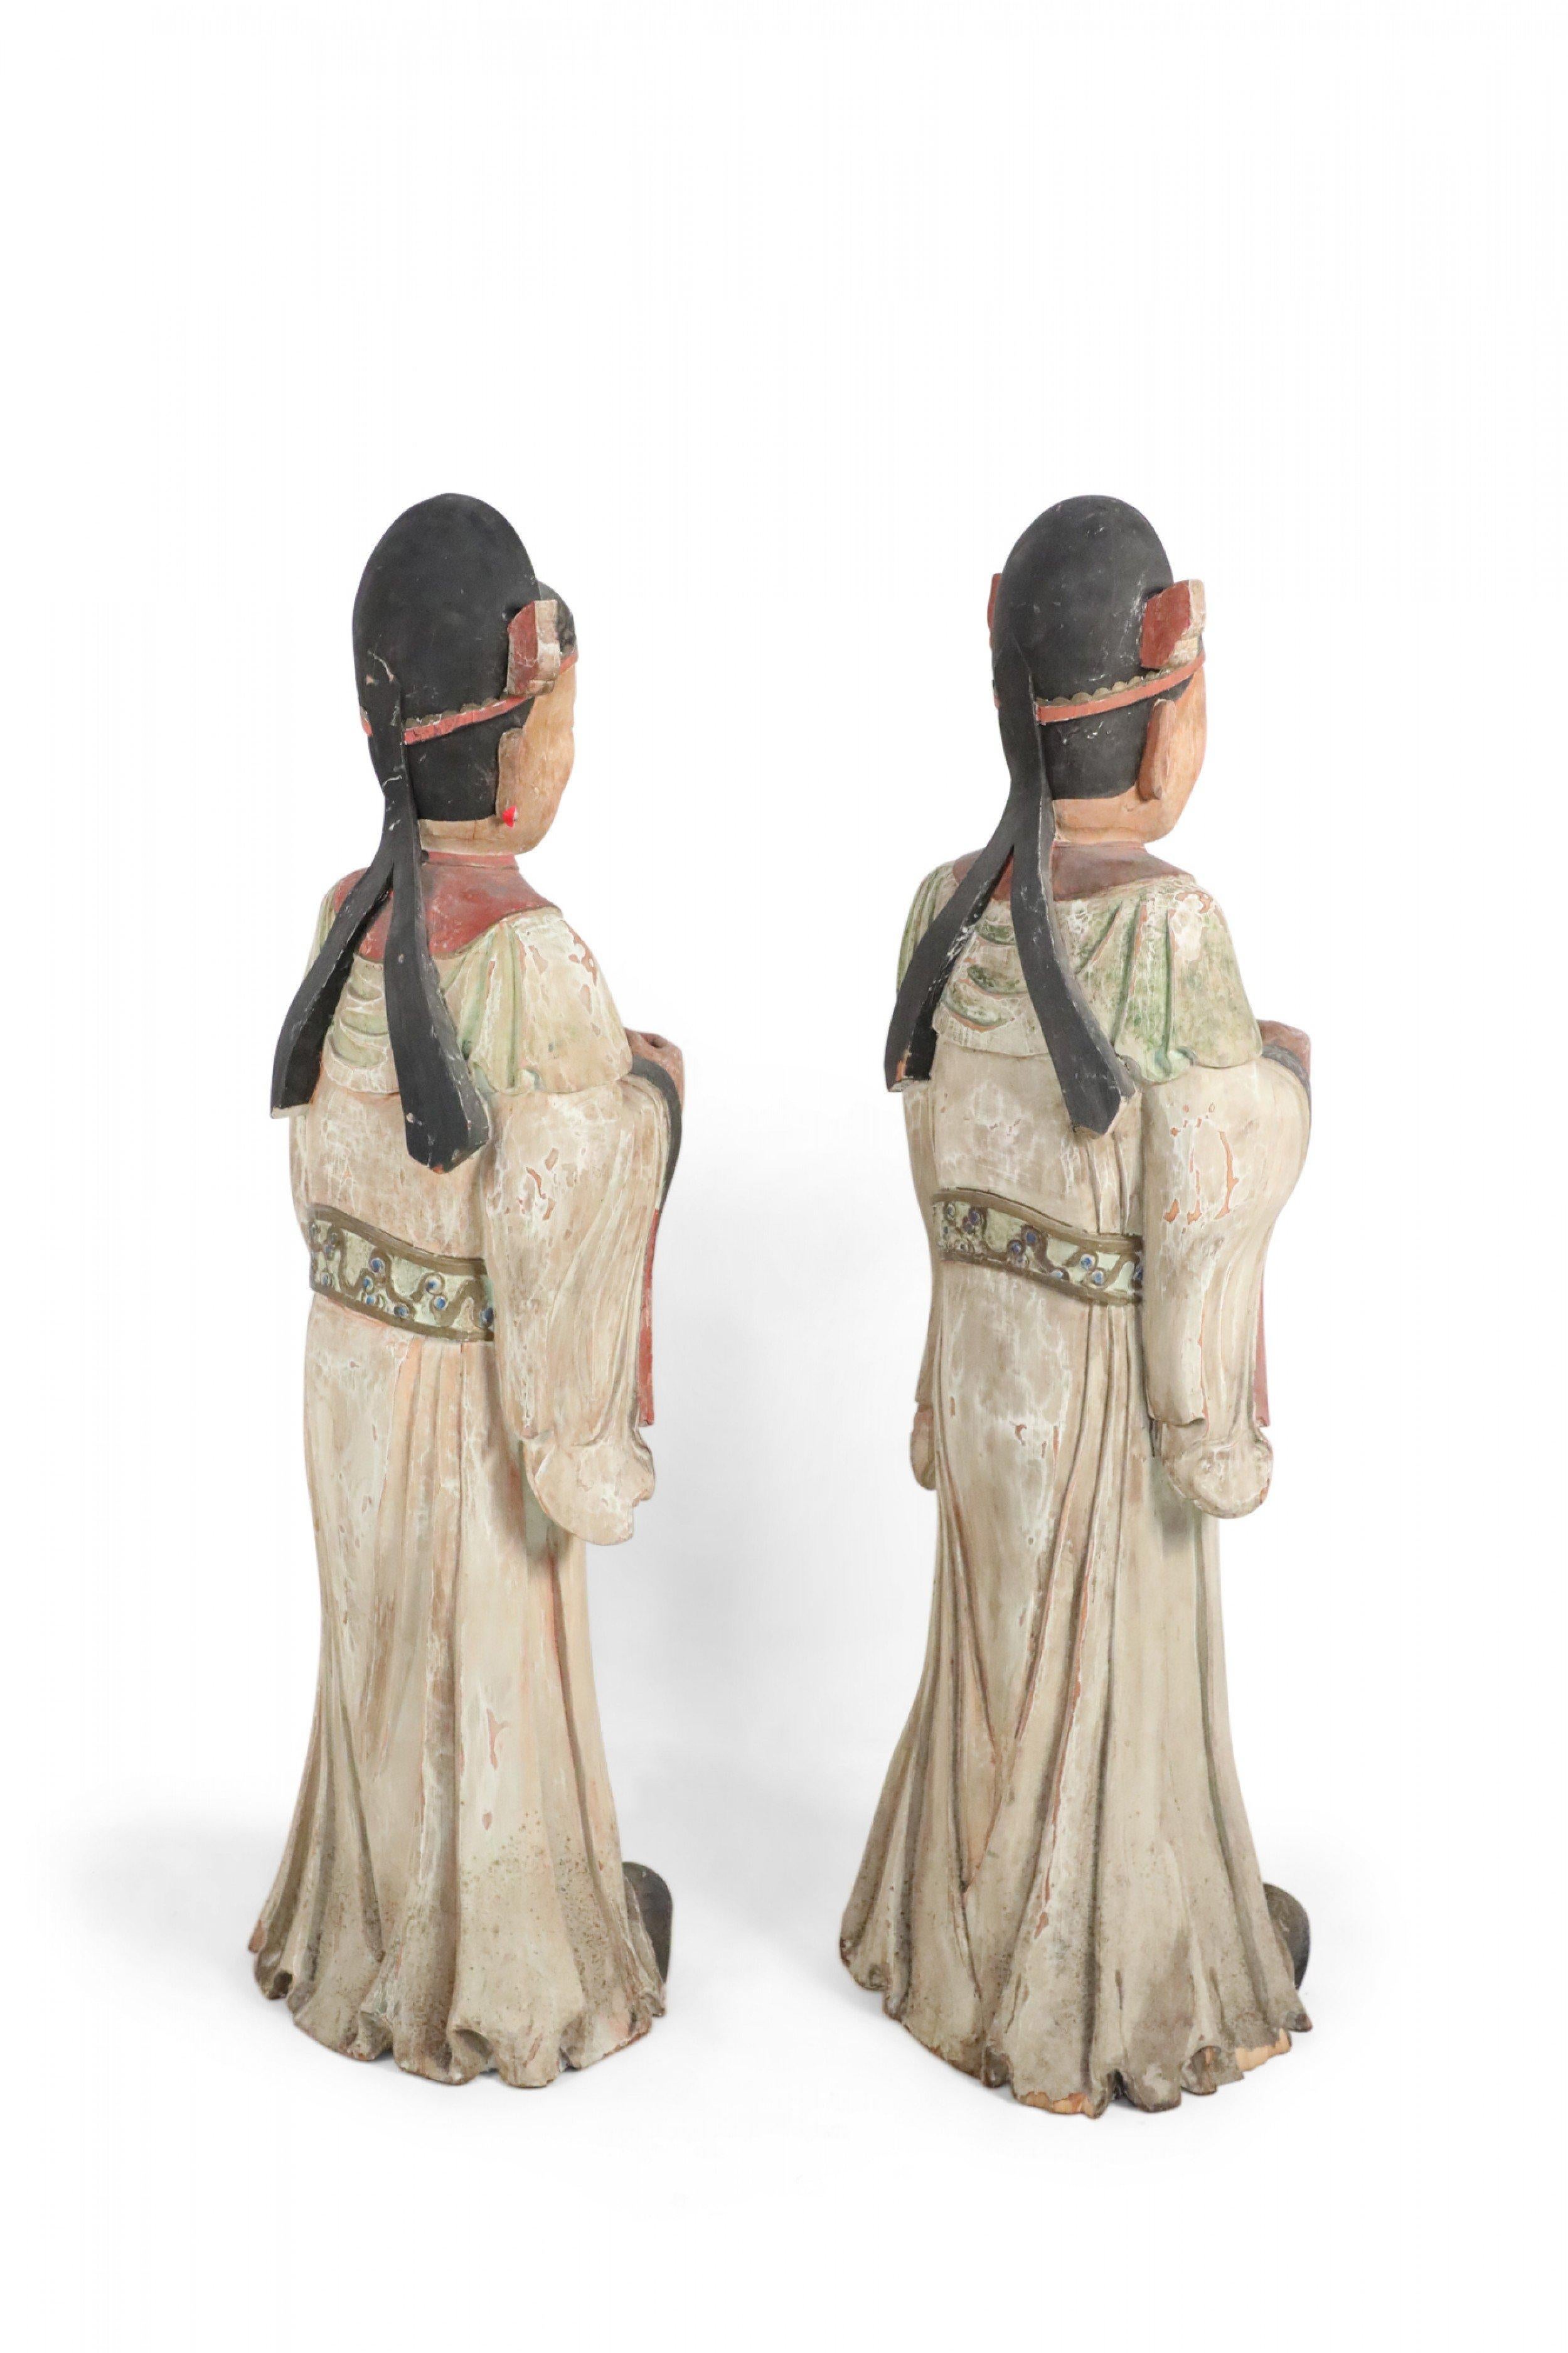 Pair of Chinese Carved Wood Civil Officer Statues In Good Condition For Sale In New York, NY